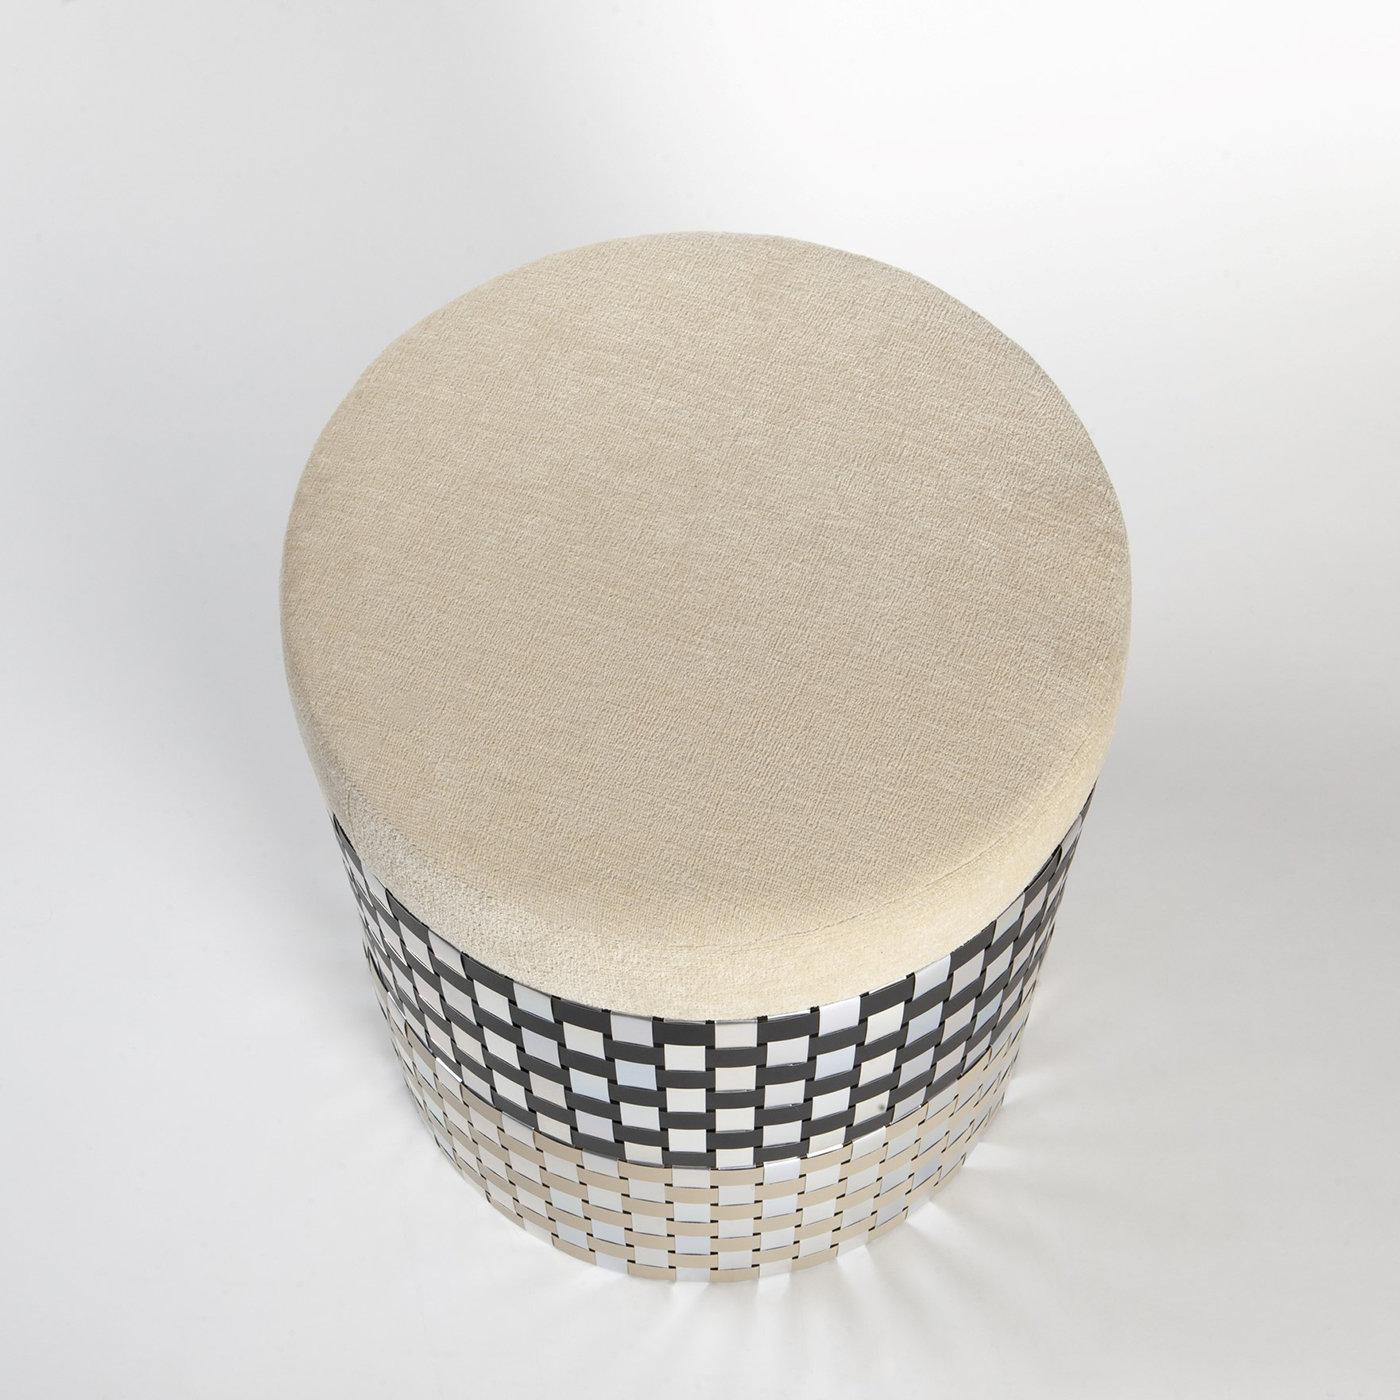 Simple in shape yet hypnotizing in design, this cylindrical pouf is named after Vesta, the virgin goddess of the hearth, home, and family in Ancient Rome. Topped by a plush, round seat cushion, its wheeled silhouette consists of recycled aluminum